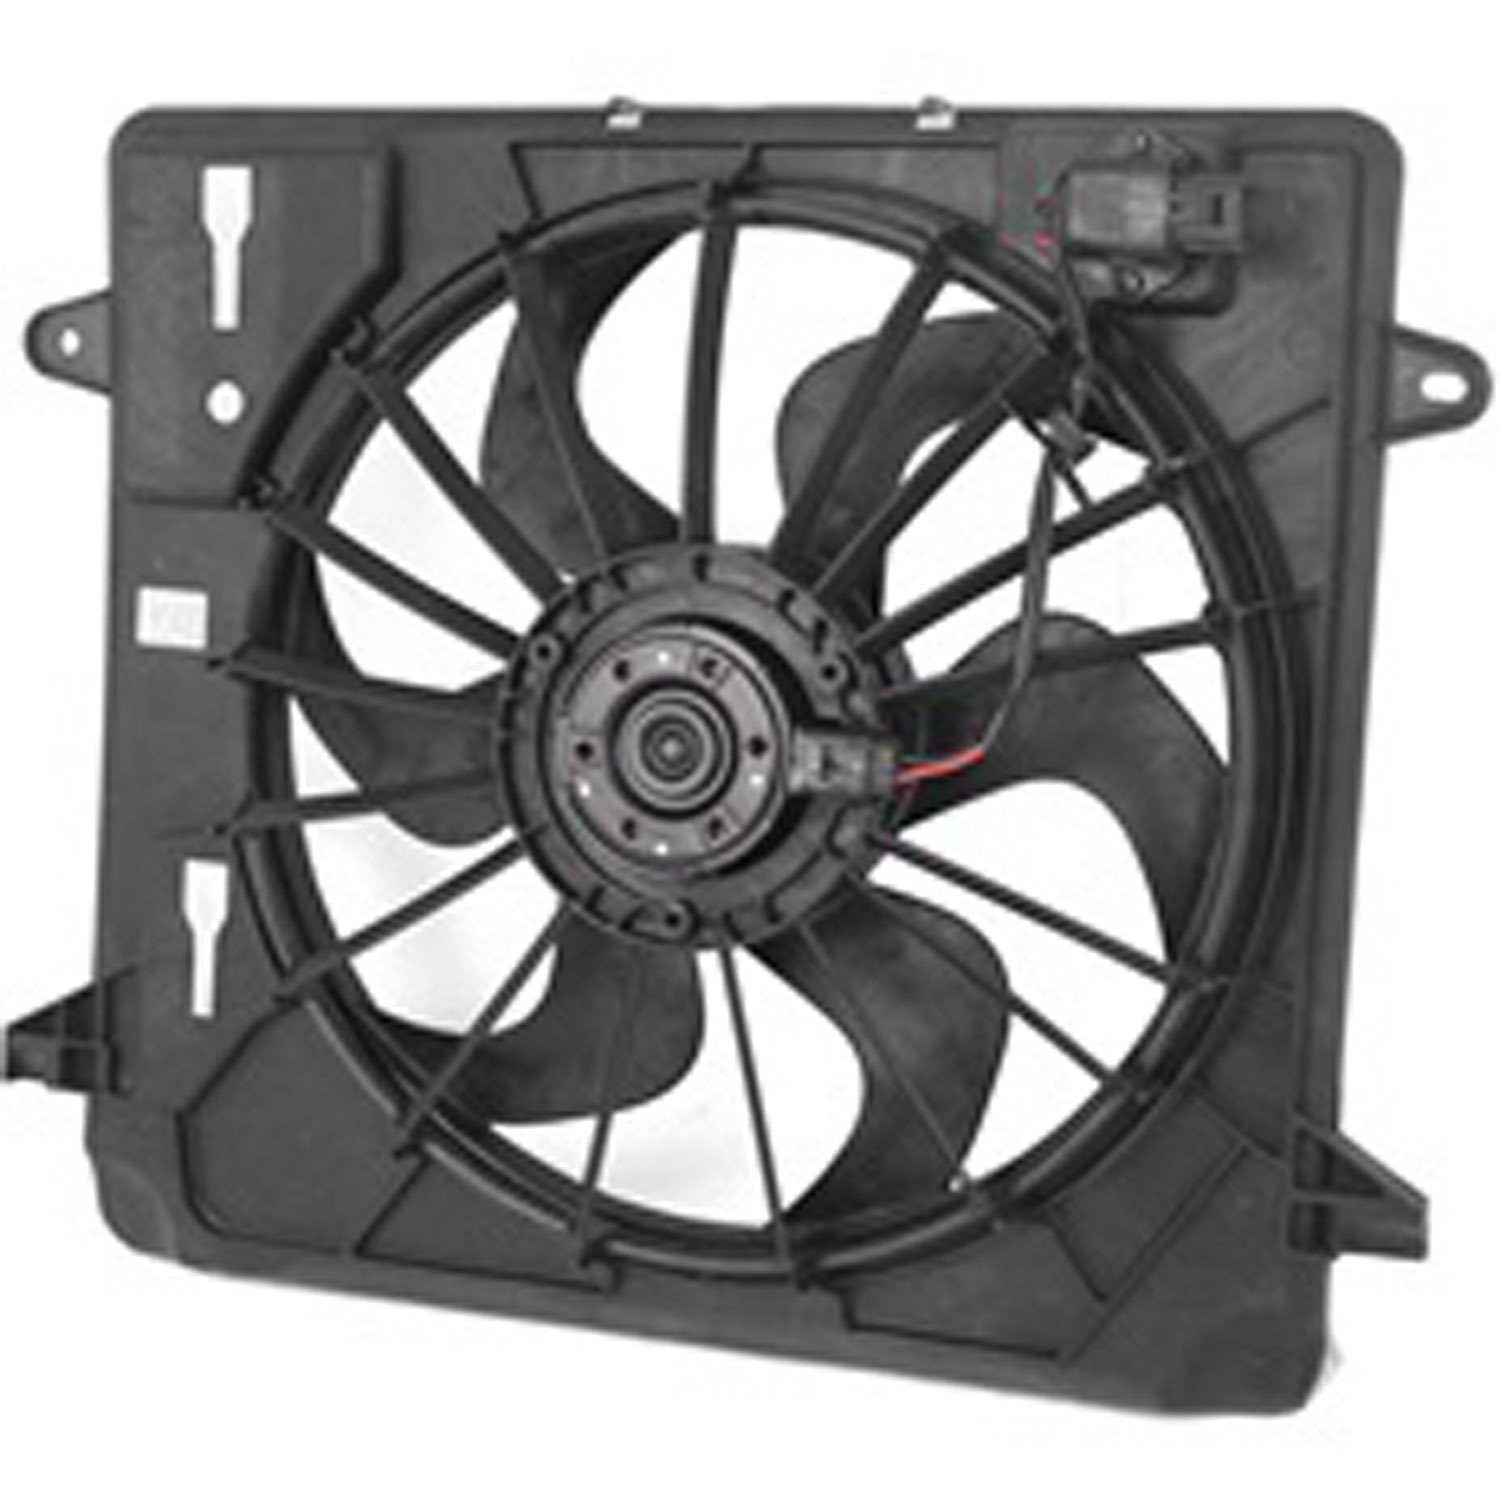 Replacement fan assembly from Omix-ADA, Fits 07-11 Jeep Wrangler with a 3.8L engine.